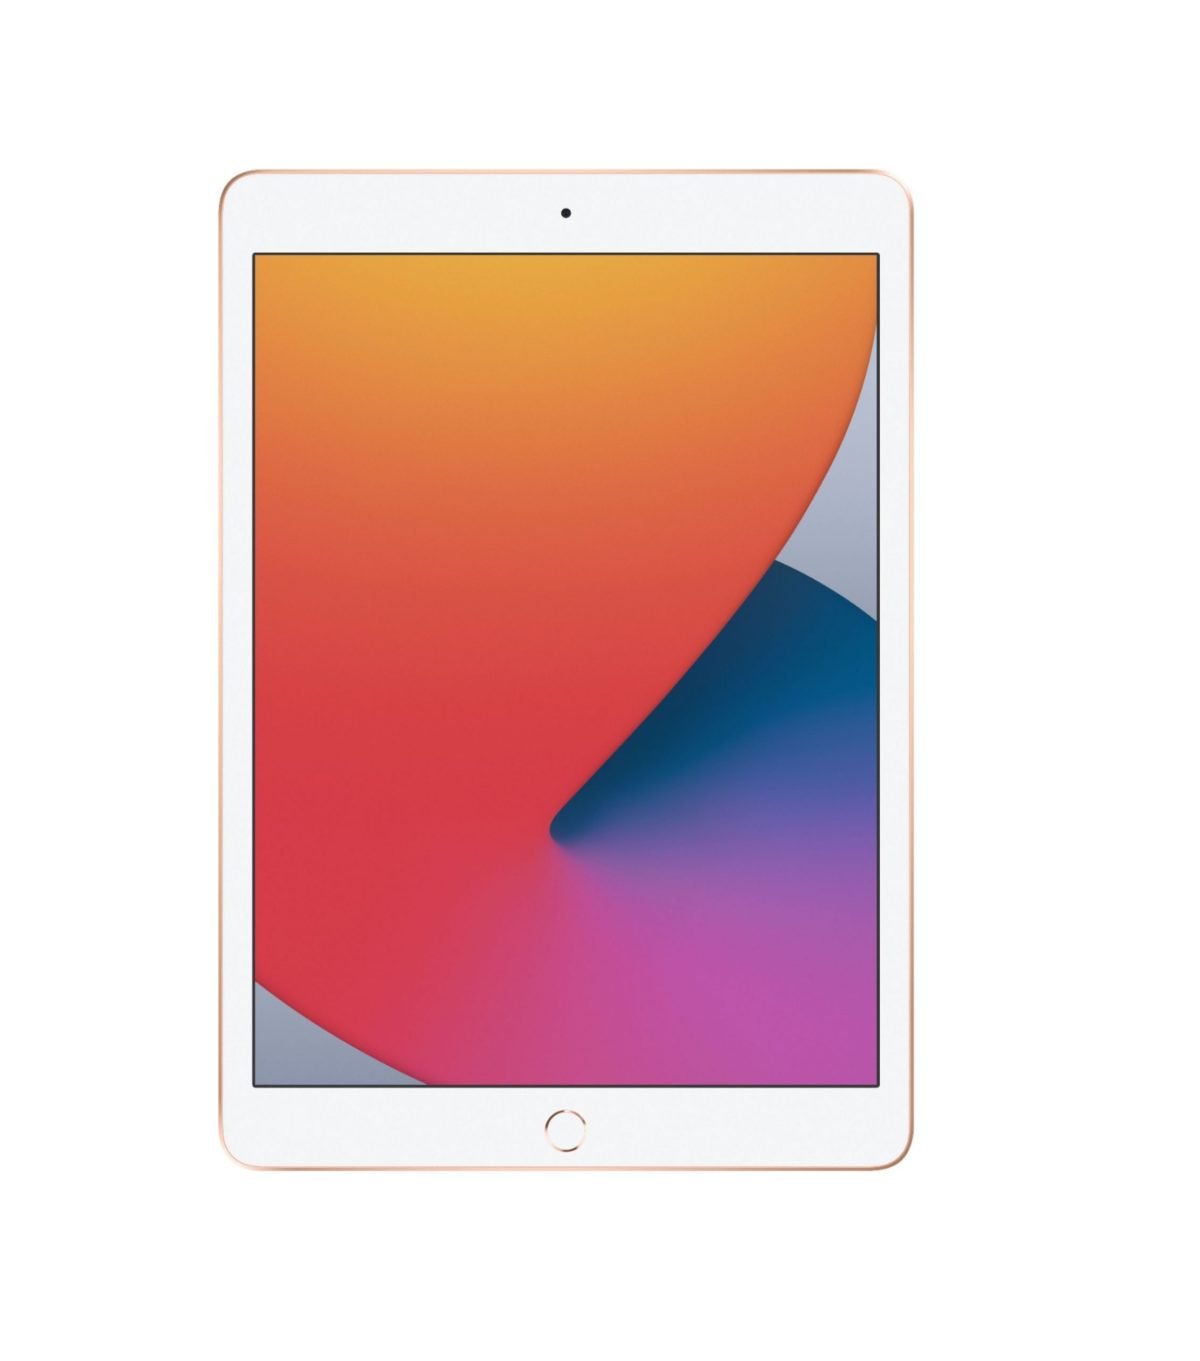 5199902 Sd Scaled Apple &Lt;Div Class=&Quot;Sku-Title&Quot;&Gt; &Lt;H1 Class=&Quot;Heading-5 V-Fw-Regular&Quot;&Gt;Apple - 10.2-Inch Ipad - Latest Model - (8Th Generation) With Wi-Fi - 128Gb - Gold - Mylf2Ll&Lt;/H1&Gt; &Lt;/Div&Gt; &Lt;Div Class=&Quot;Product-Description&Quot;&Gt; &Lt;Div Class=&Quot;Product-Description&Quot;&Gt;The New Ipad. It'S Your Digital Notebook, Mobile Office, Photo Studio, Game Console, And Personal Cinema. The A12 Bionic Chip Can Easily Power Essential Apps And Immersive Games. So You Can Edit A Document While Researching On The Web And Making A Facetime Call To A Colleague At The Same Time. Apple Pencil Makes Note-Taking With Ipad A Breeze. Attach A Full-Size Smart Keyboard For Comfortable Typing. Go Further With Wi-Fi And Gigabit-Class Lte And All-Day Battery Life.&Lt;/Div&Gt; &Lt;/Div&Gt; Apple - 10.2-Inch Ipad - Latest Model - (8Th Generation) With Wi-Fi - 128Gb - Gold